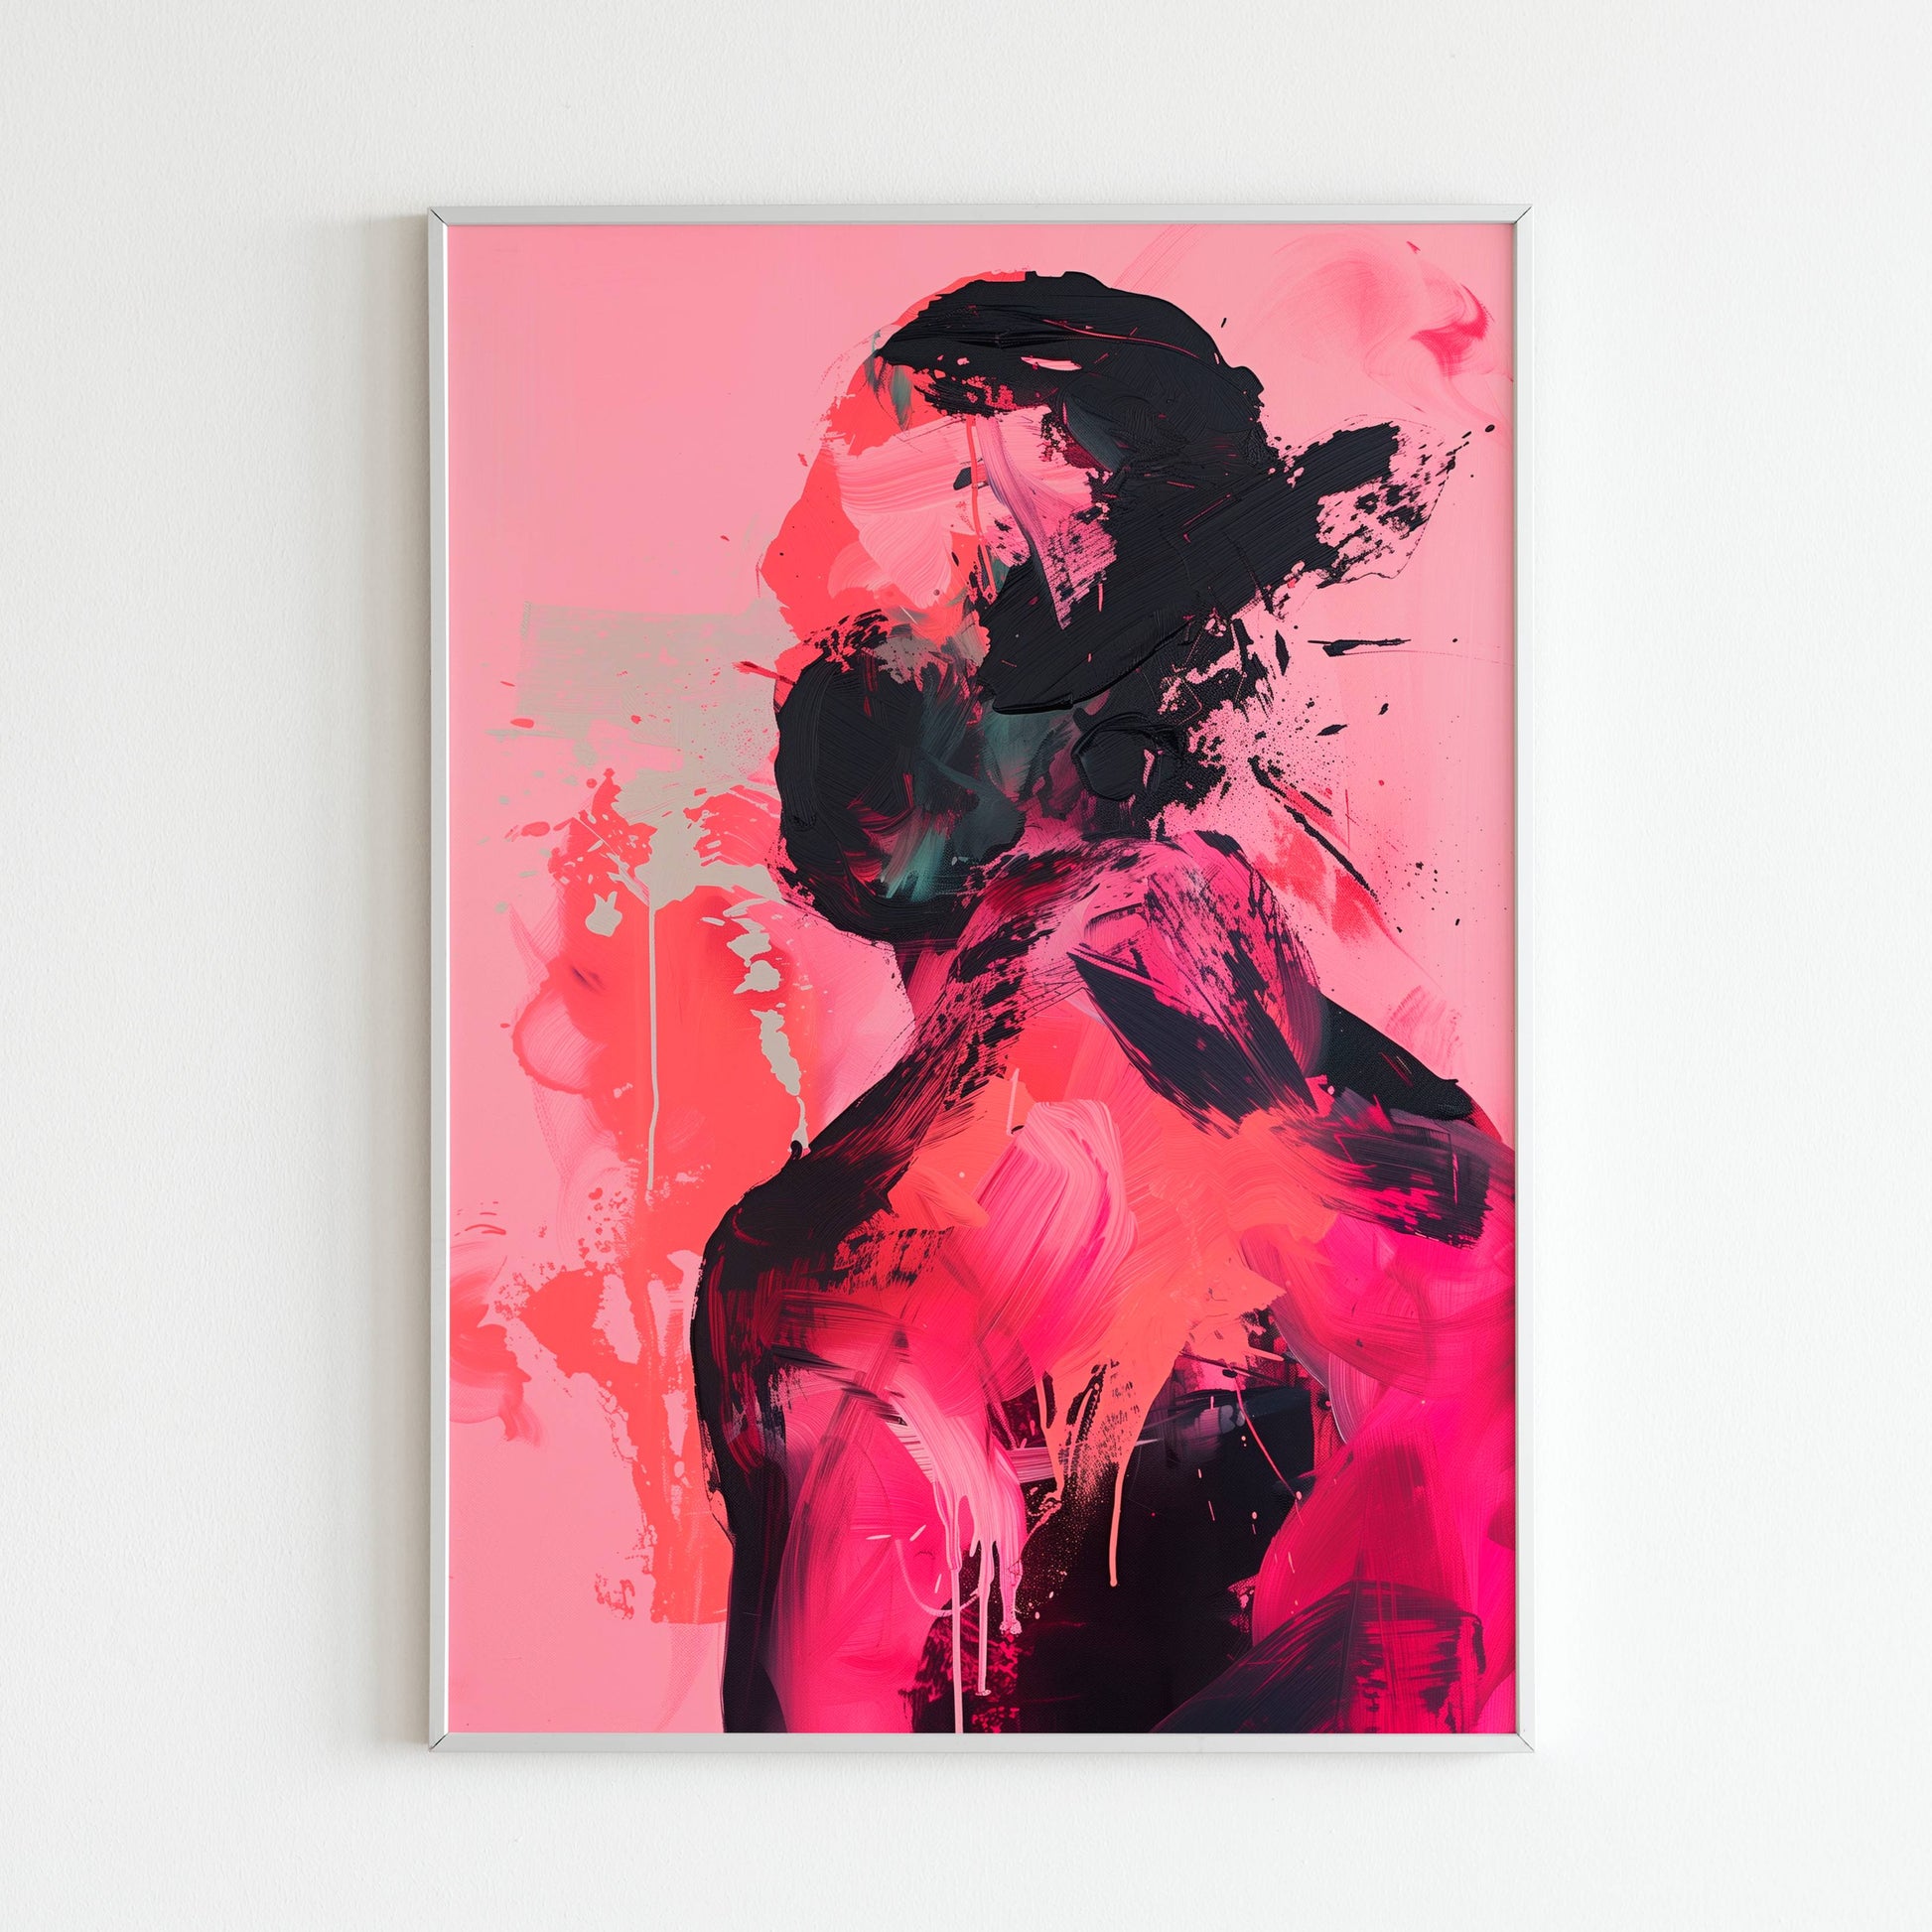 Bold Brushwork Pink - Printed Wall Art / Poster. This eye-catching poster uses bold brushstrokes and vibrant pink to create a modern and energetic statement. Arrives ready to hang.